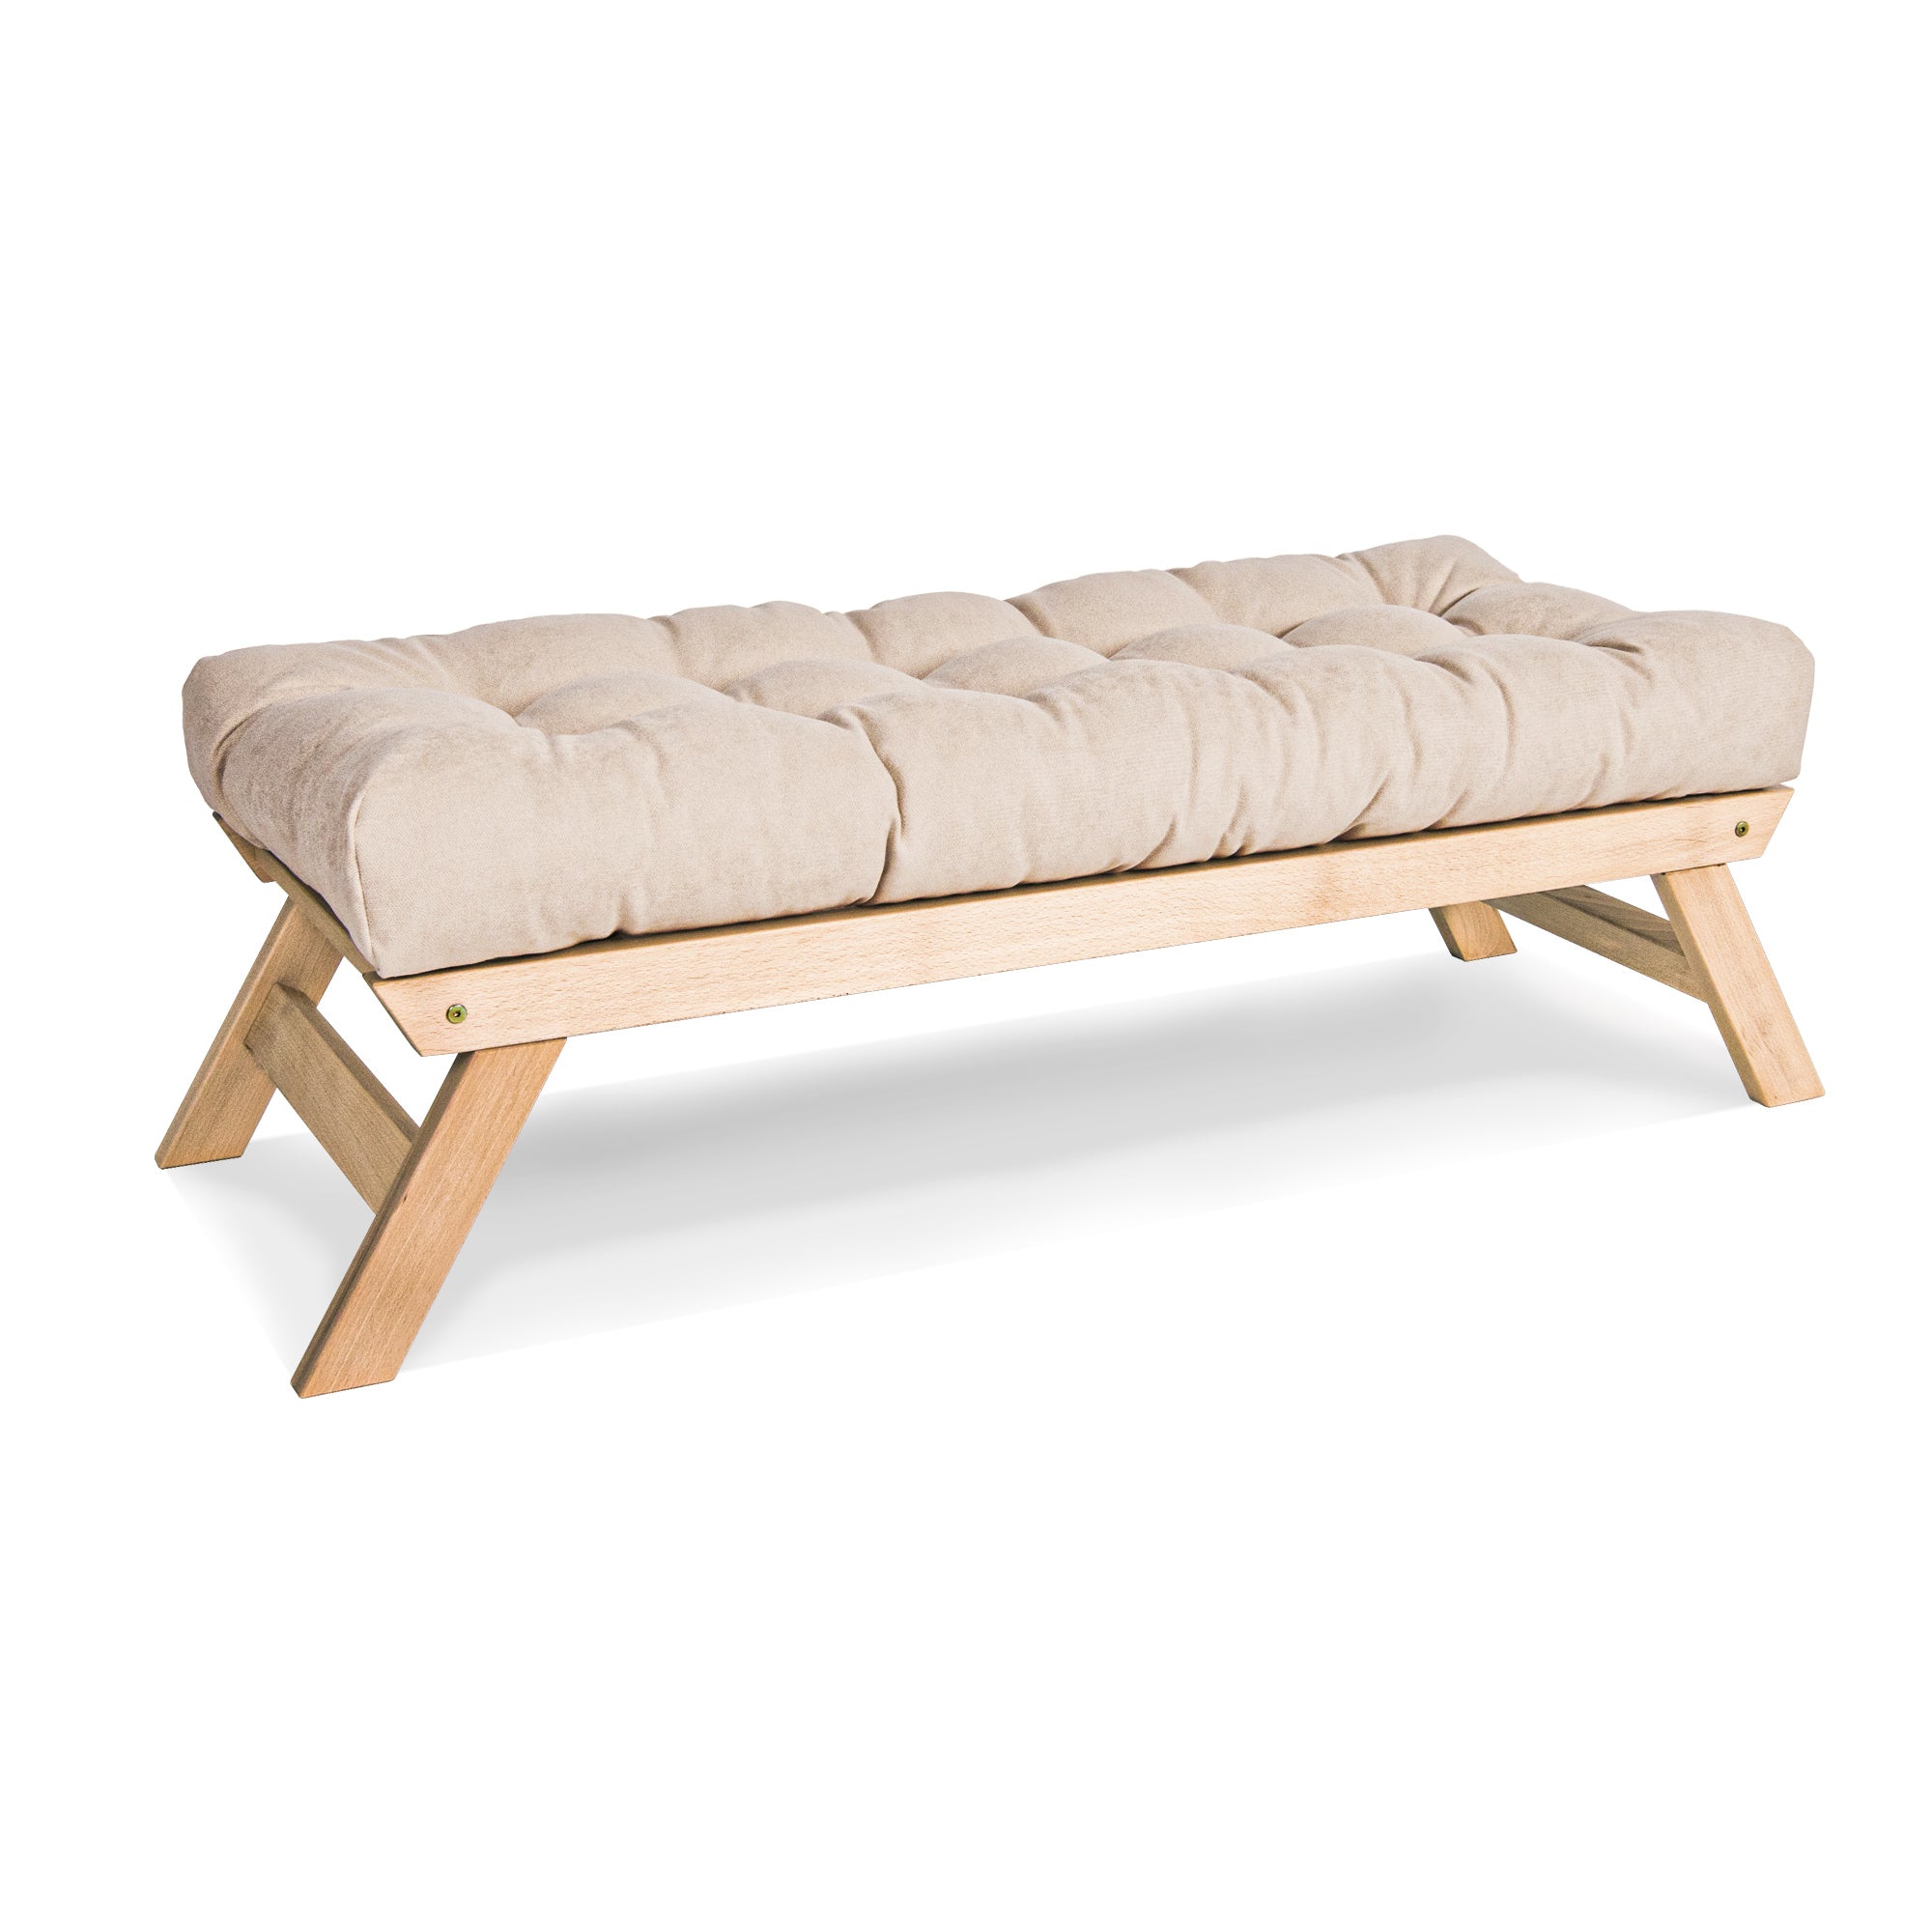 ALLEGRO Wooden Bench Seat with Cushions